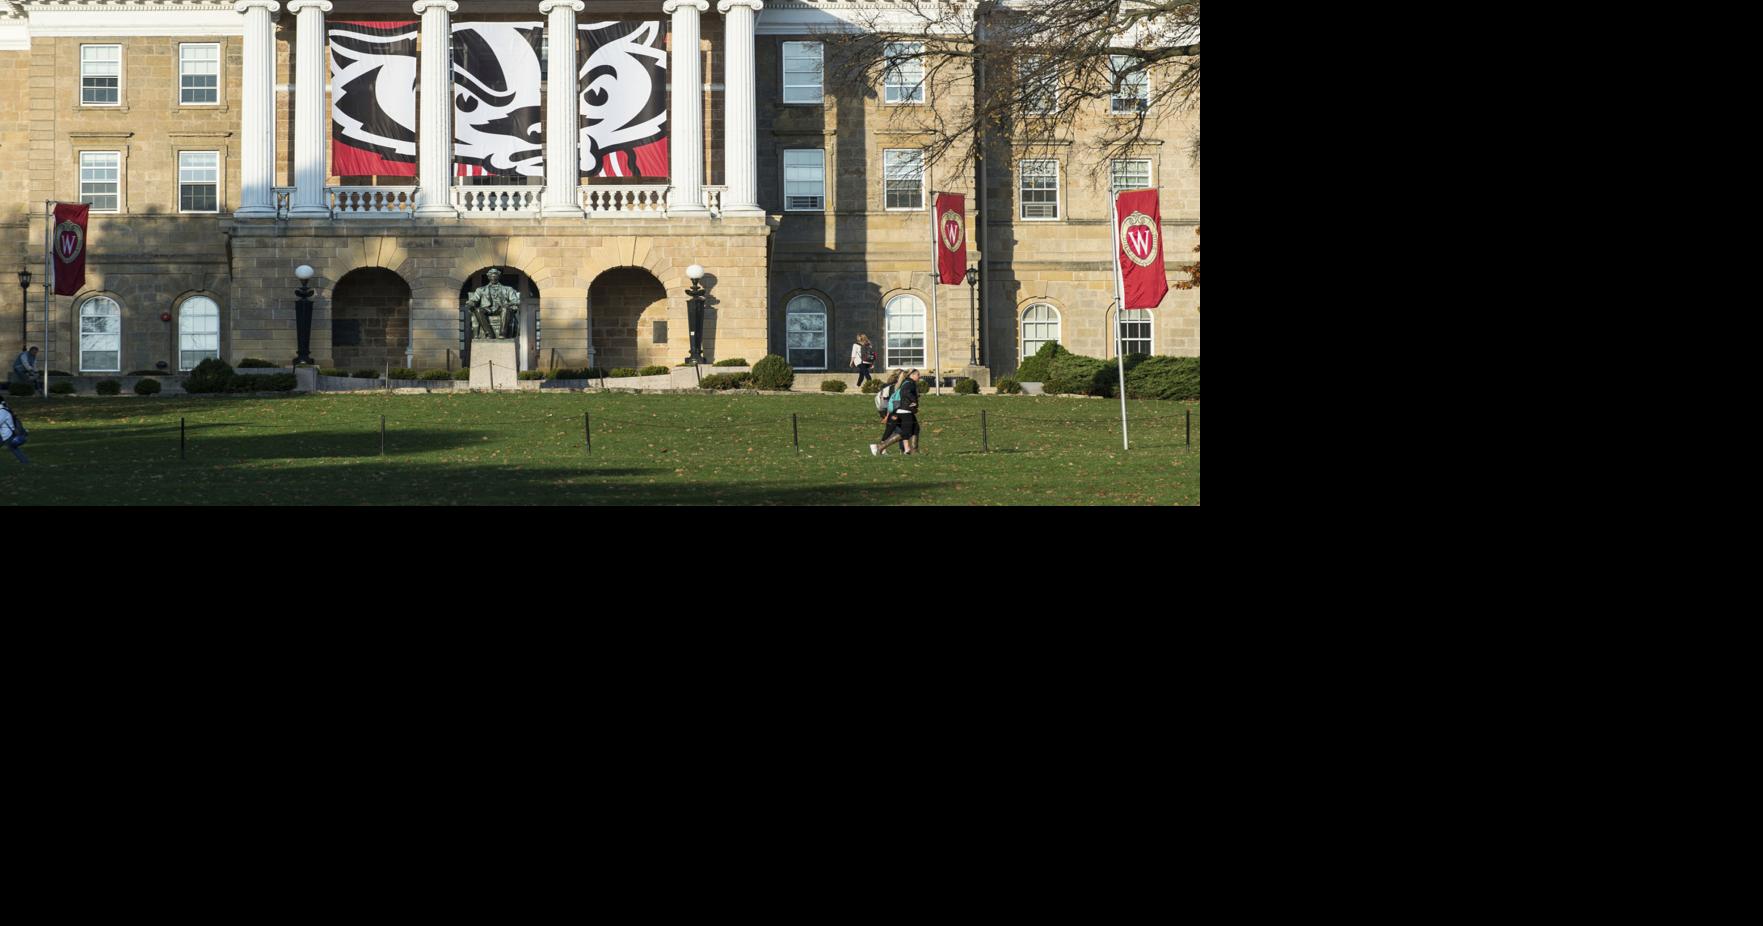 Local students named to UWMadison fall dean's list